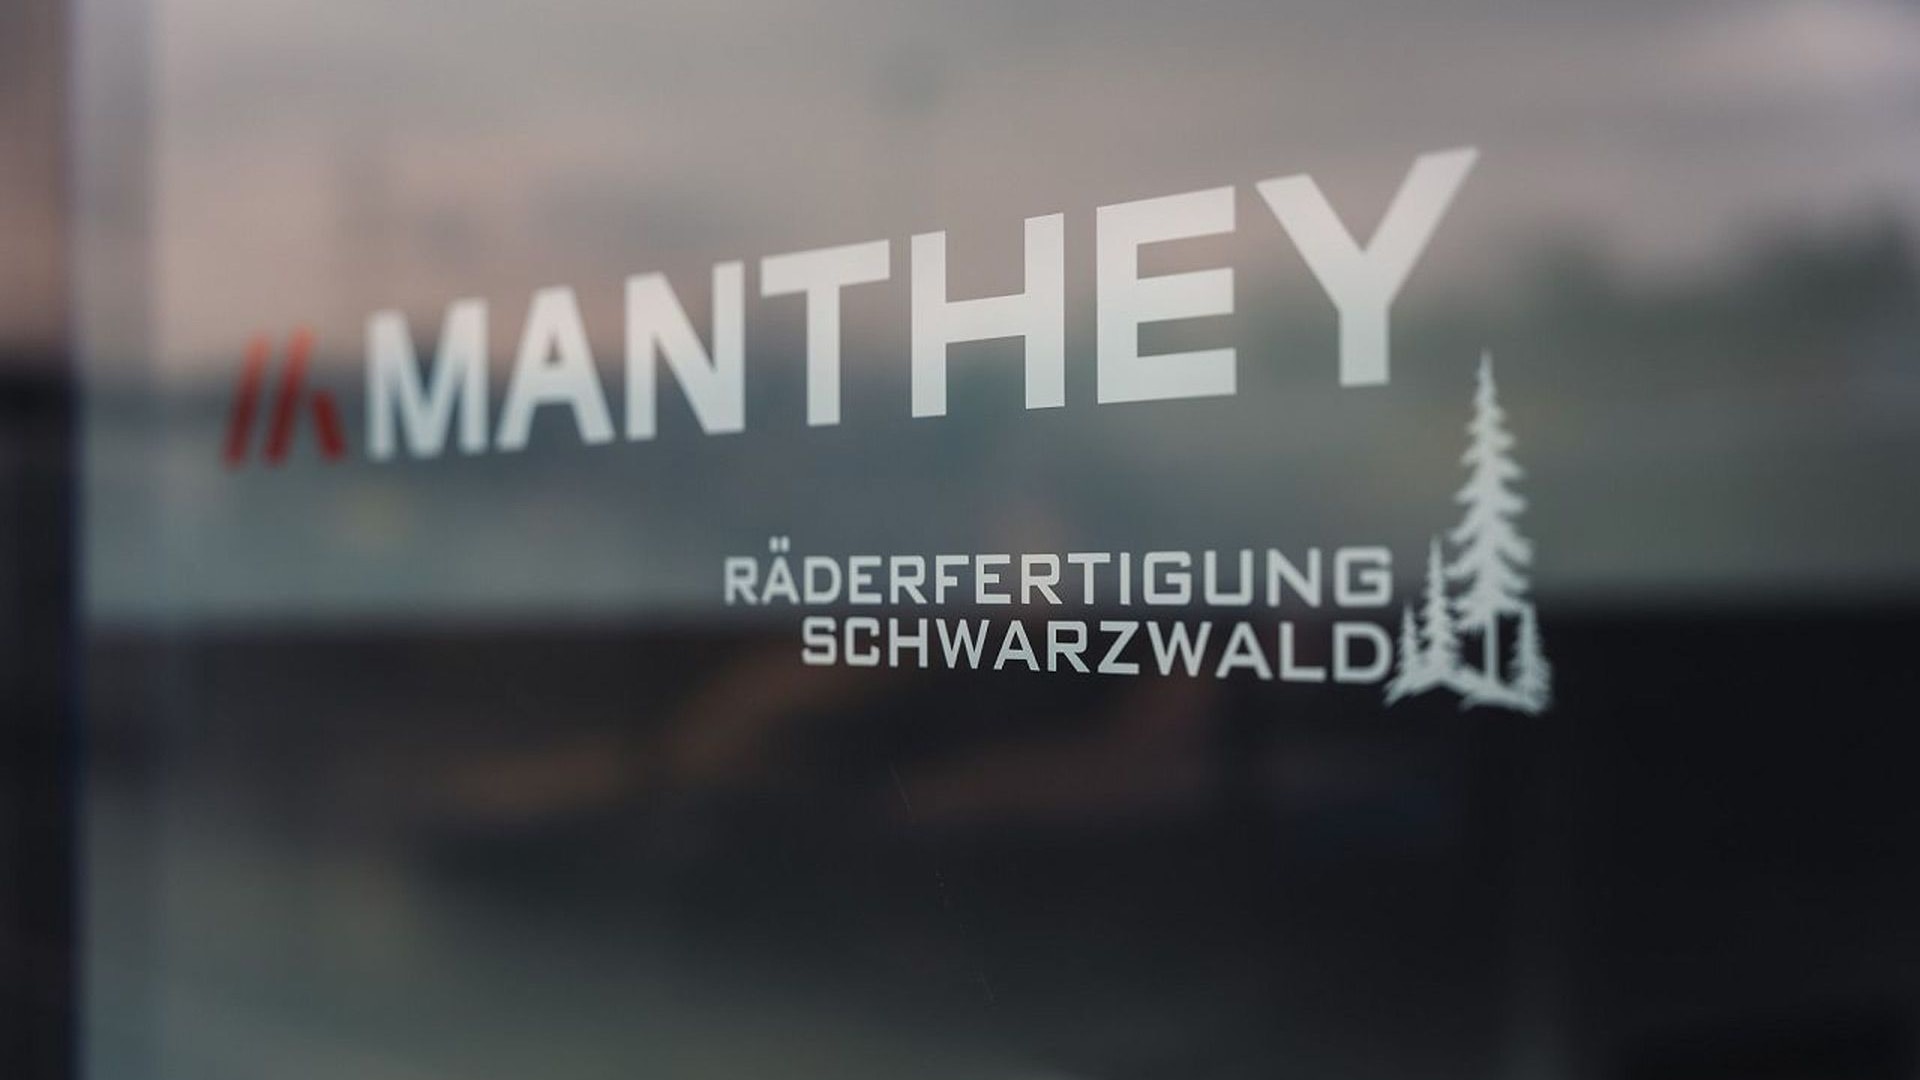 Manthey-Racing wheel production facility in Freudenstadt, Germany